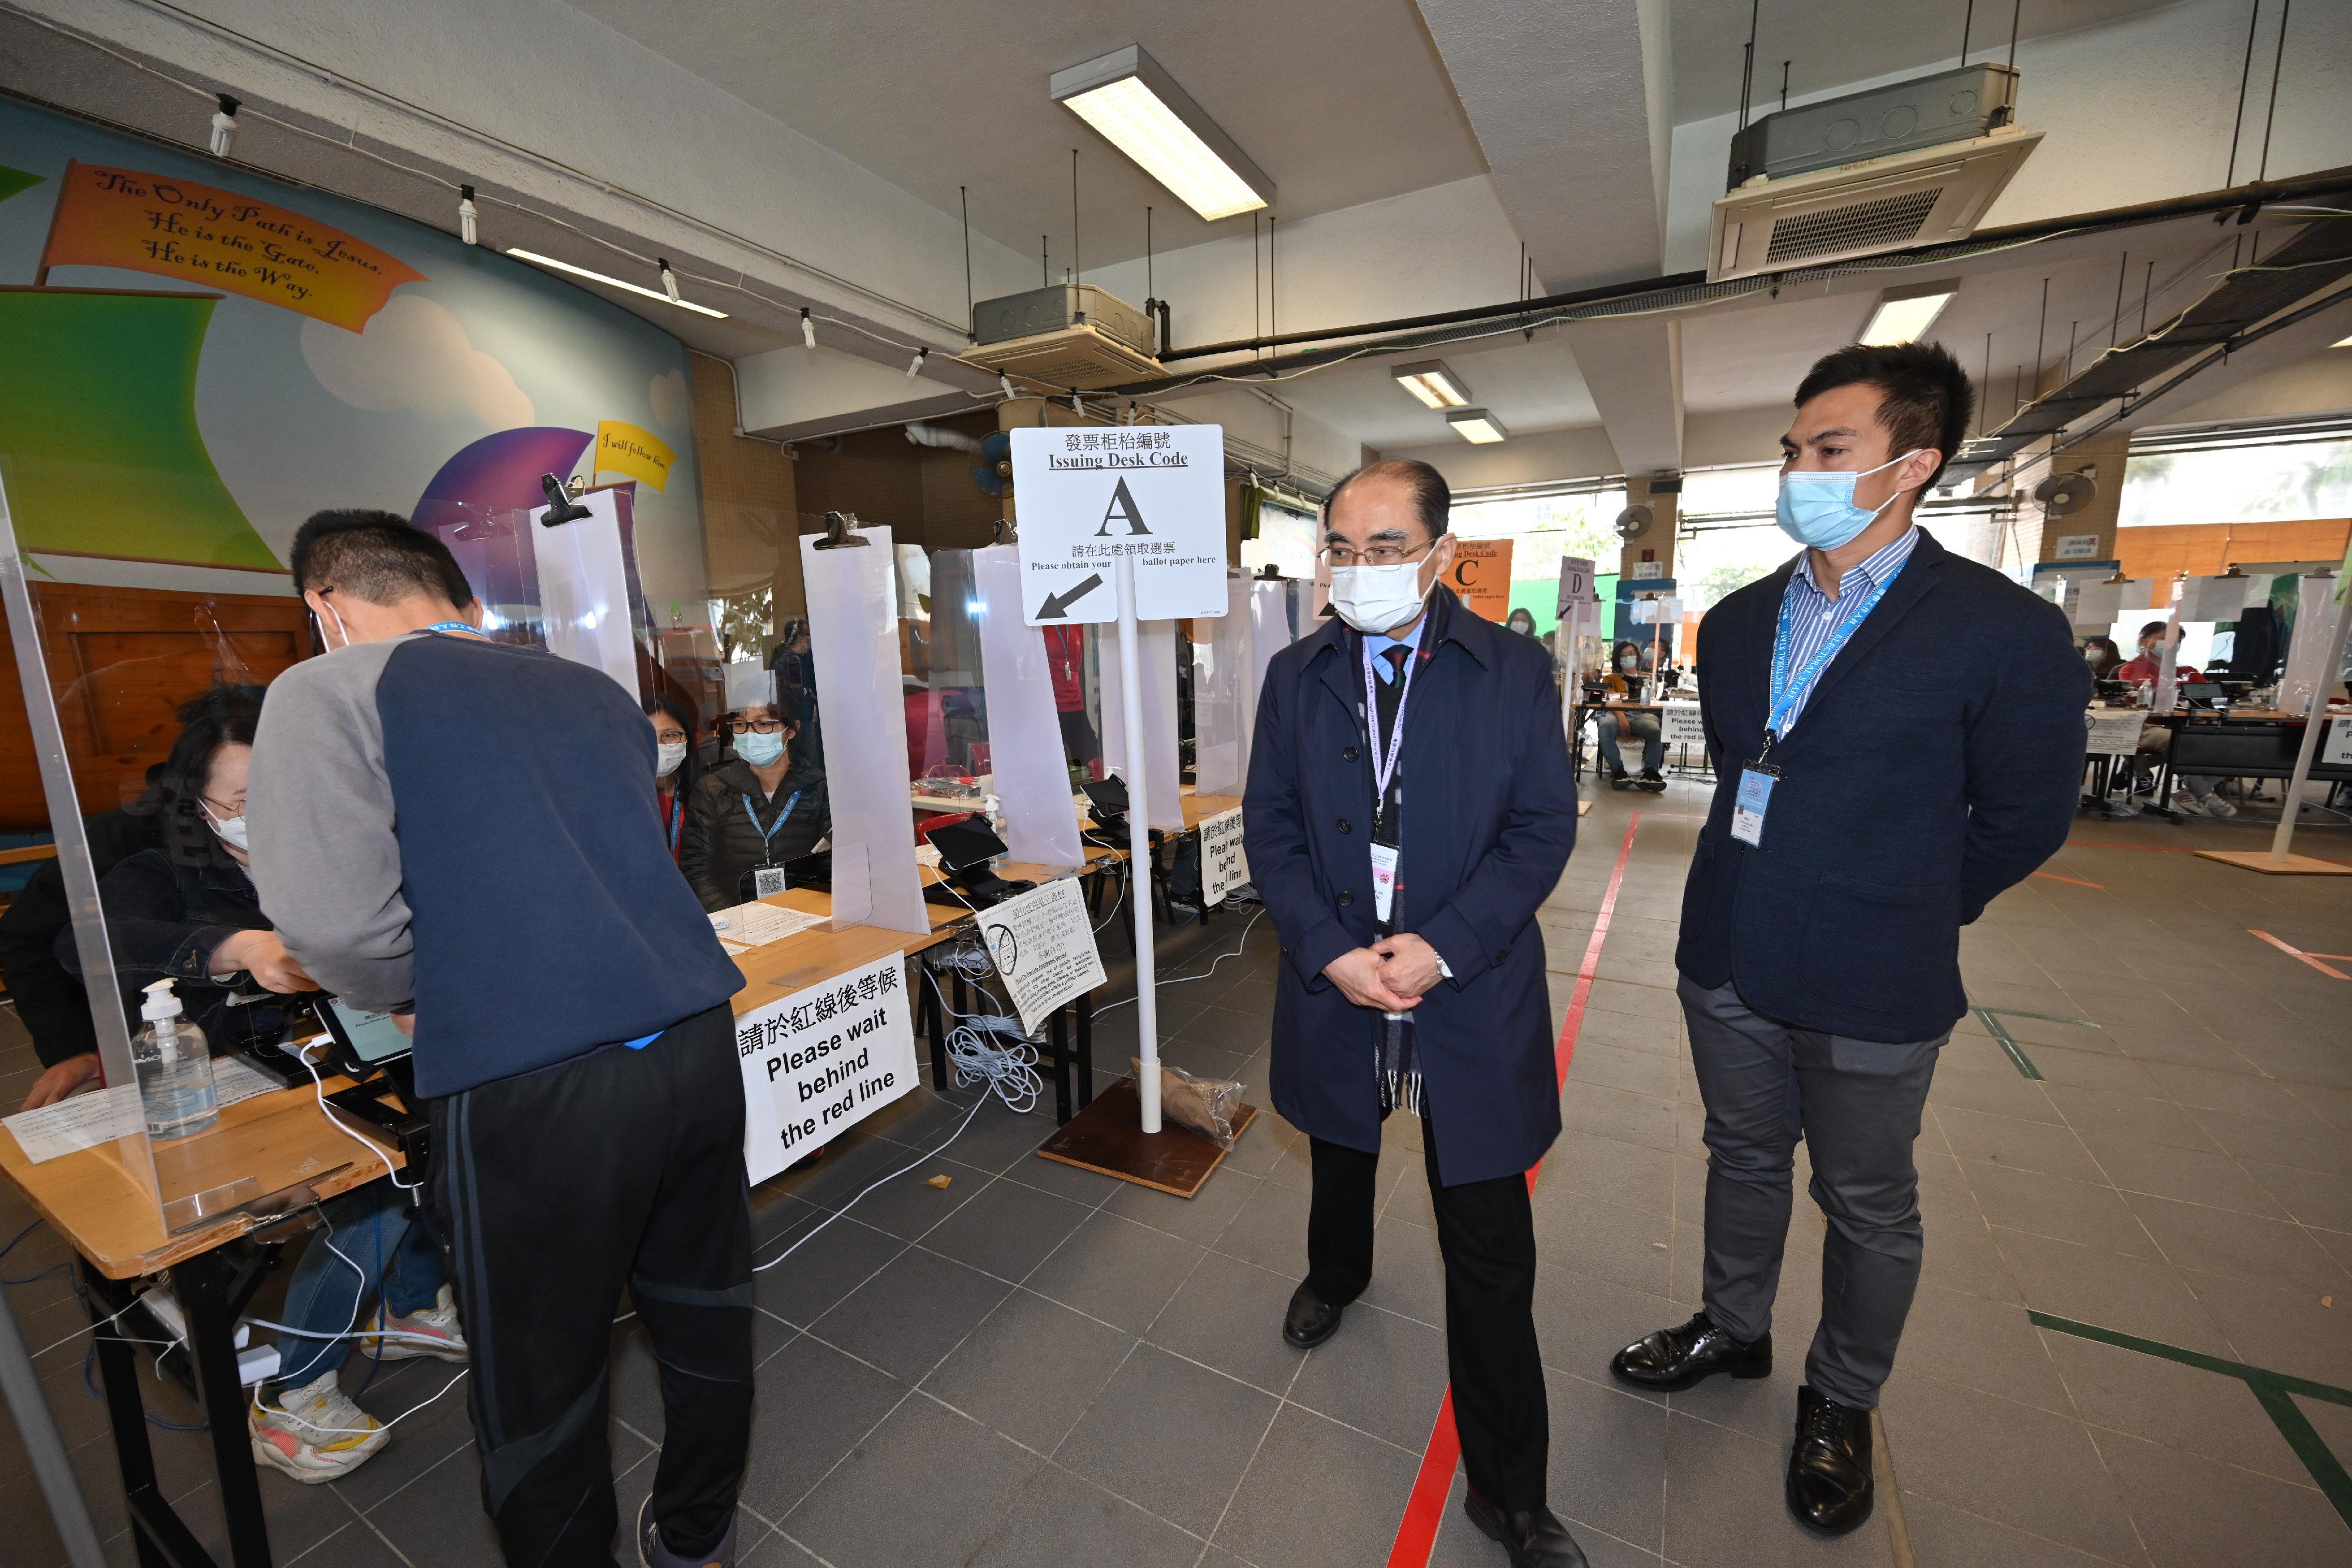 Electoral Affairs Commission member Mr Arthur Luk, SC (centre), visits the polling station of the 2021 Legislative Council General Election at Yaumati Catholic Primary School (Hoi Wang Road) today (December 18) to inspect the electoral preparation work.